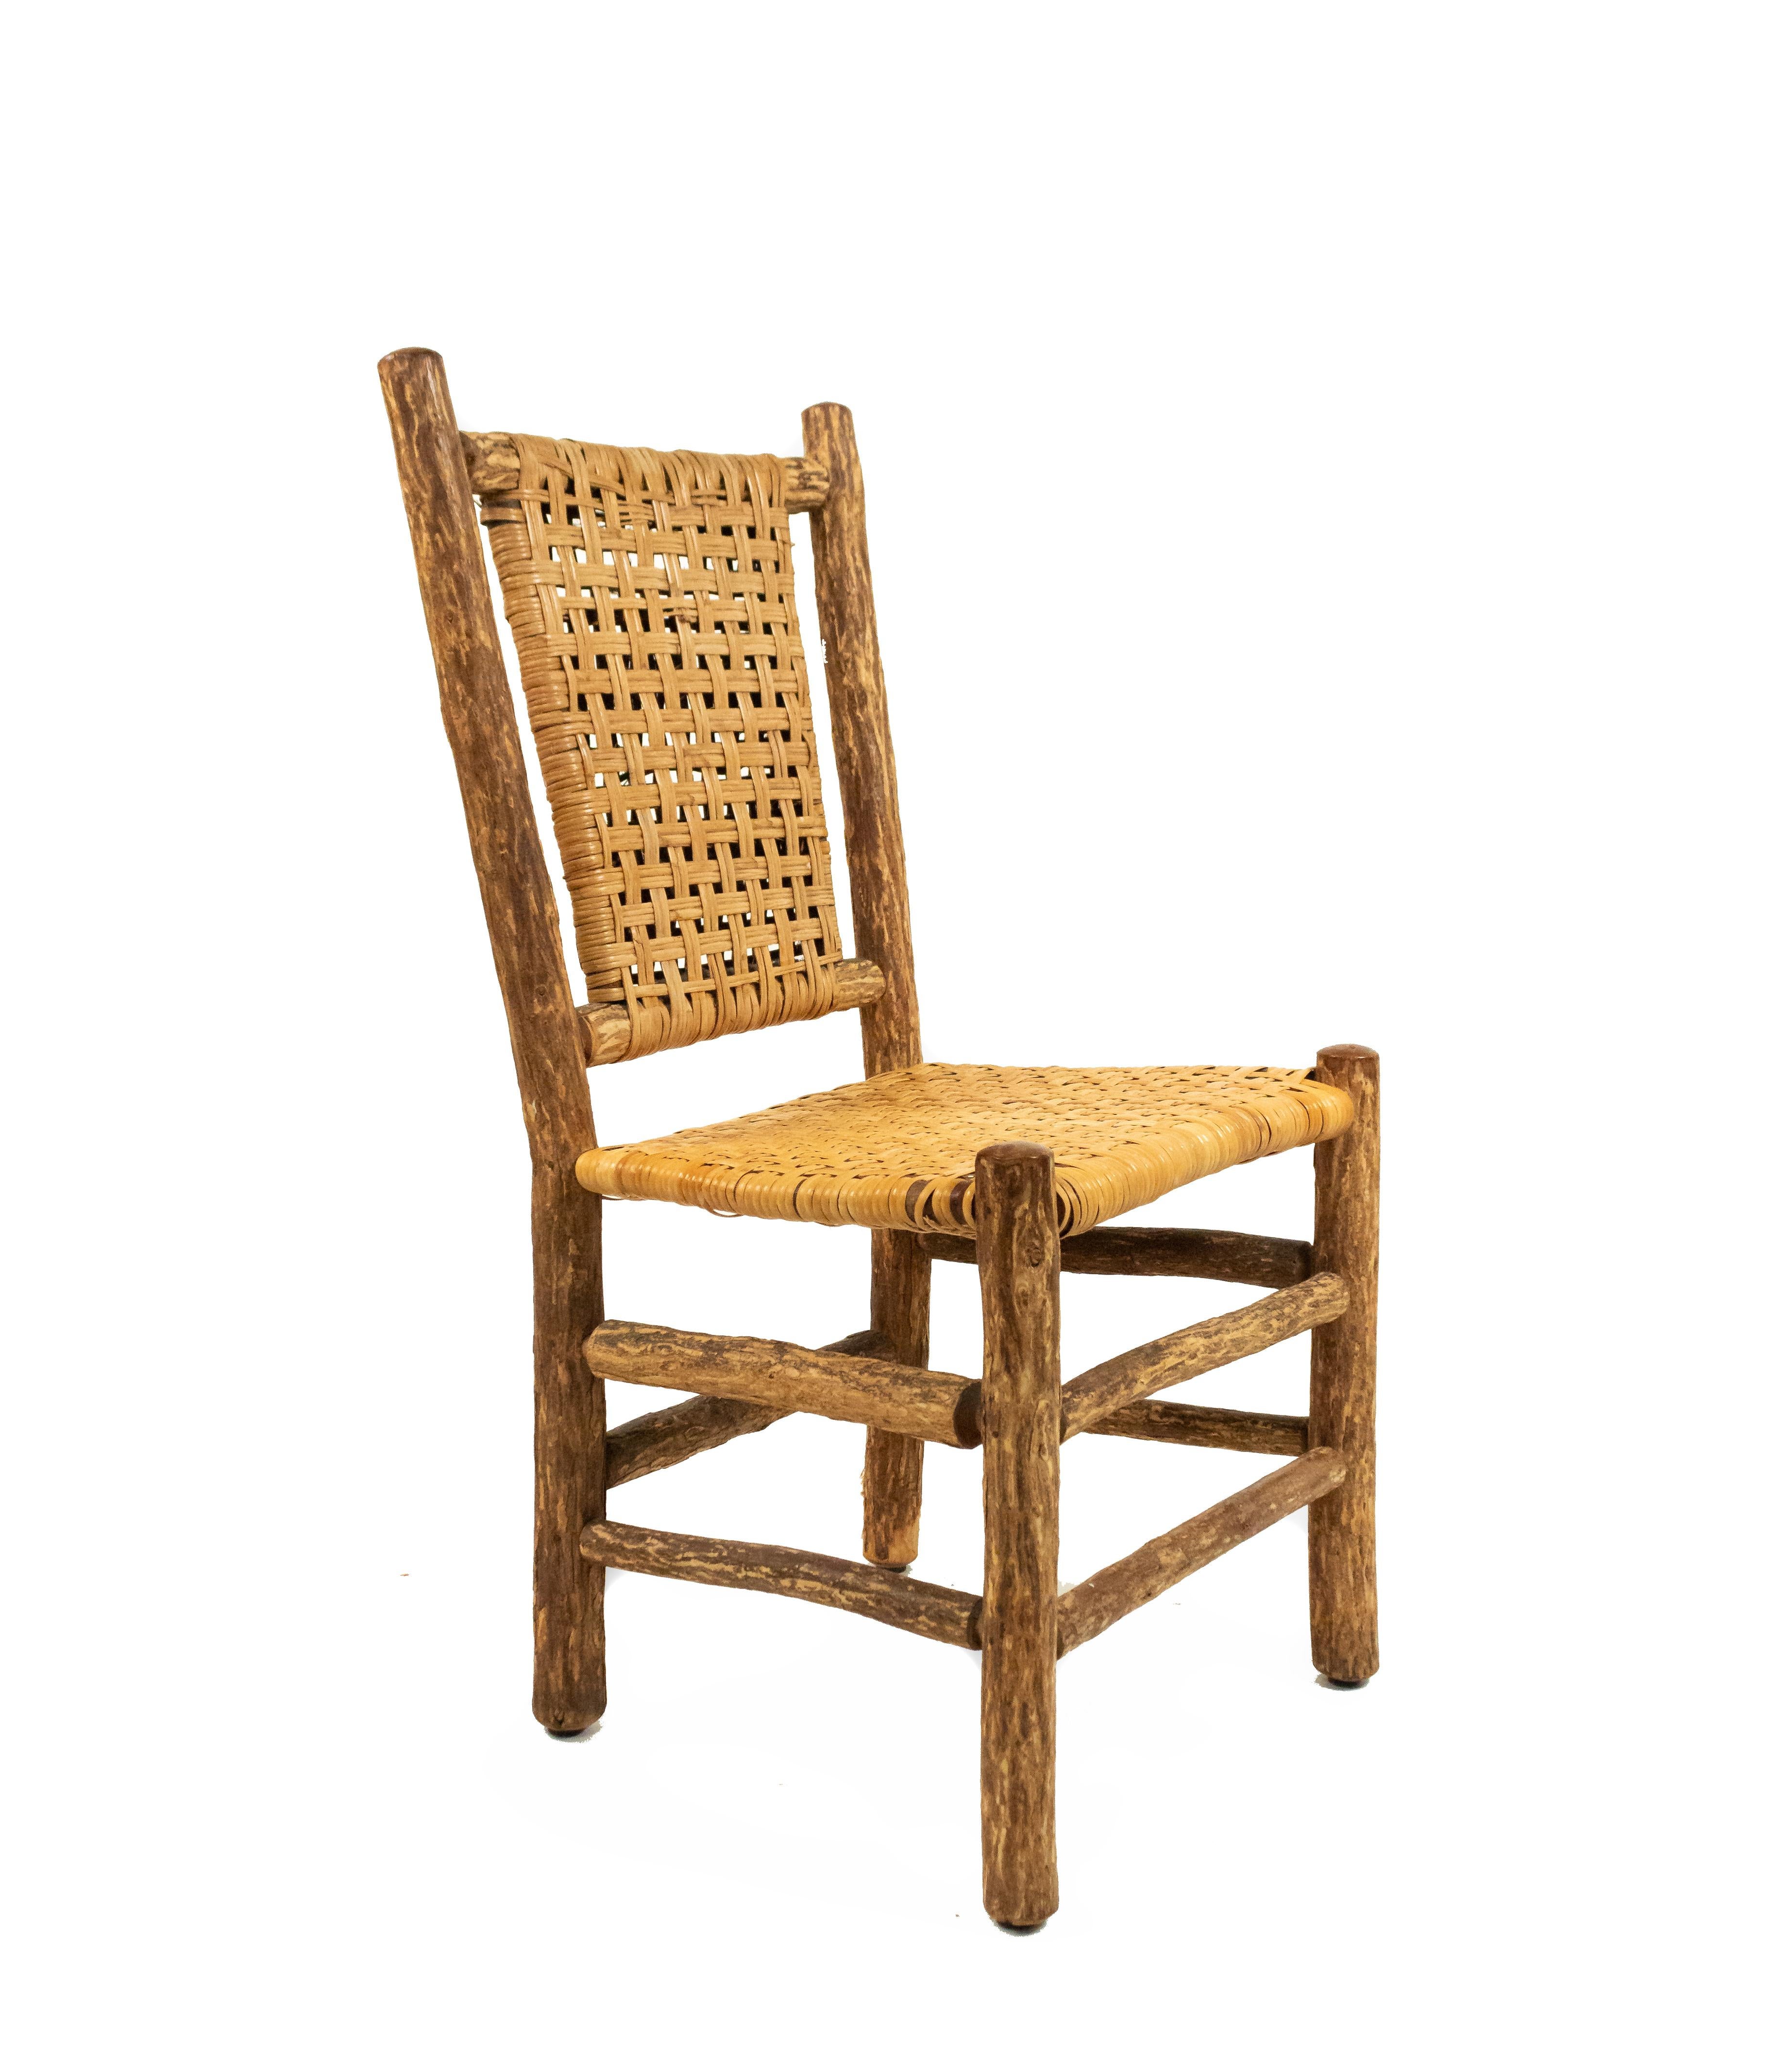 Pair of Rustic Old Hickory style (late 20th cent) side chairs with woven cane seats and backs.
     